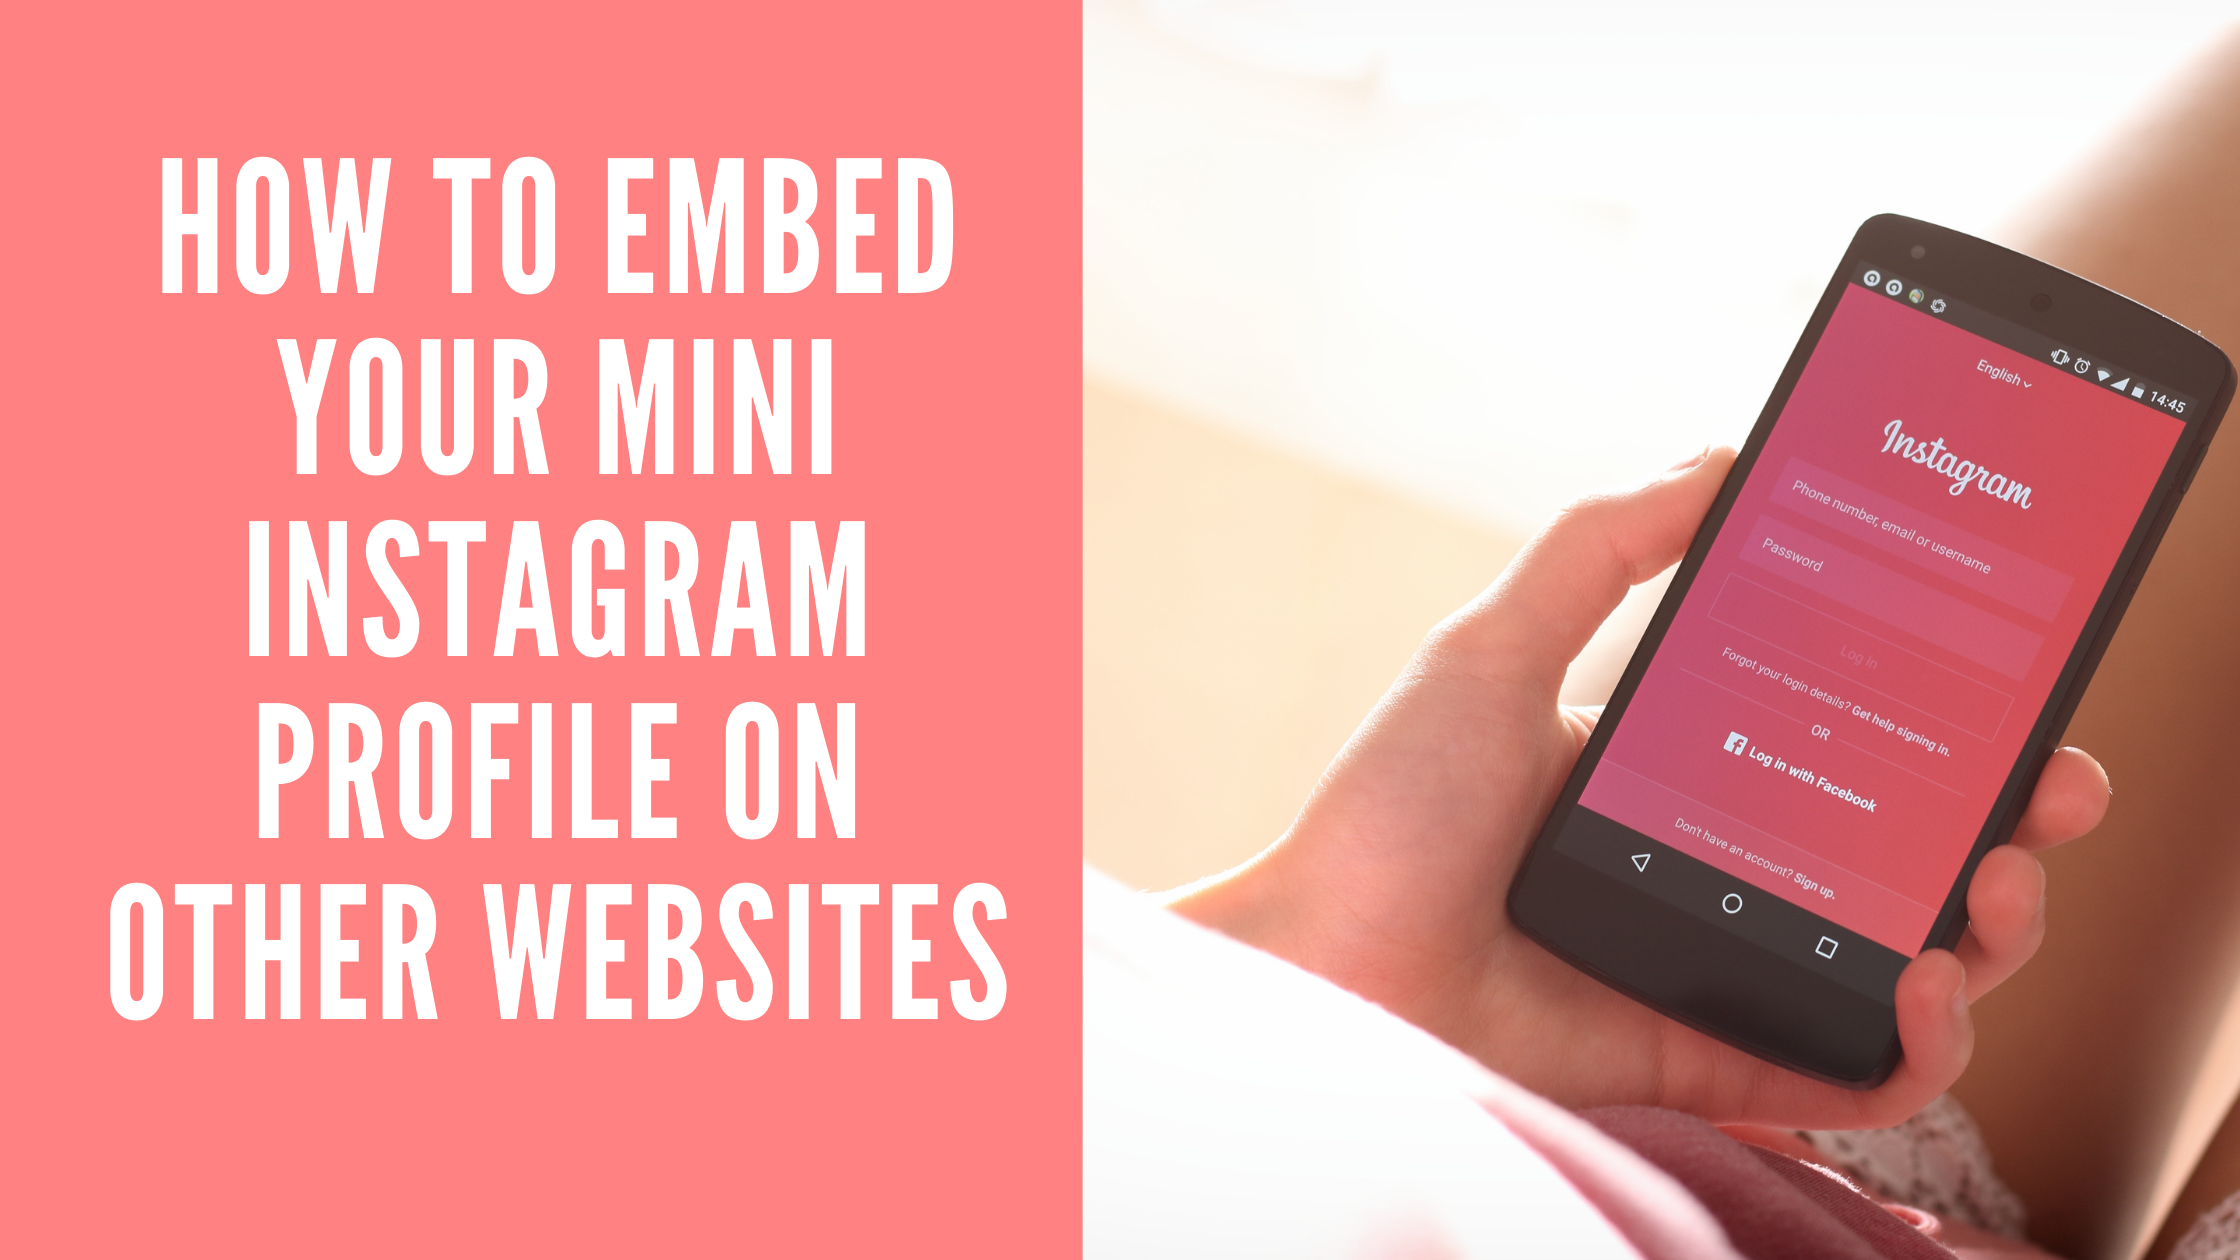 How To Embed Your Mini Instagram Profile On Other Websites